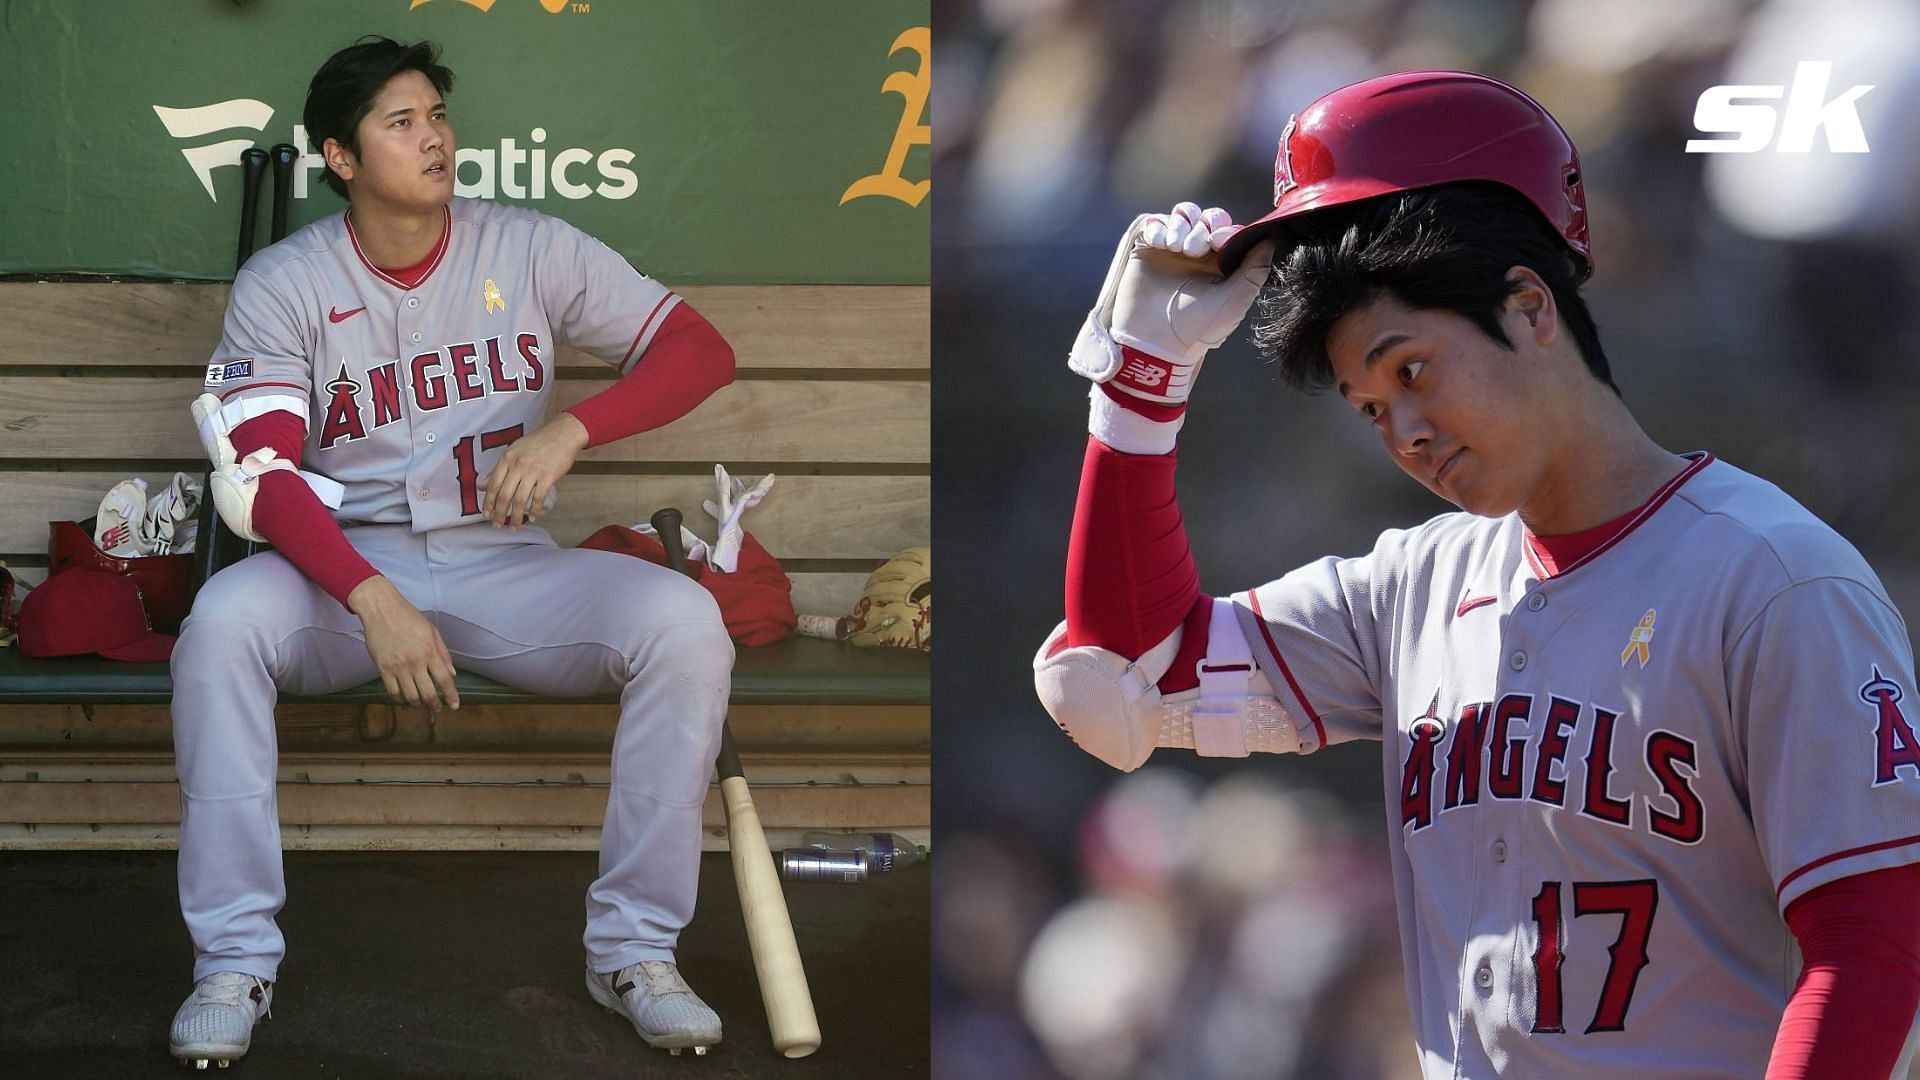 Shohei Ohtani is expected to sign his new contract this weekend